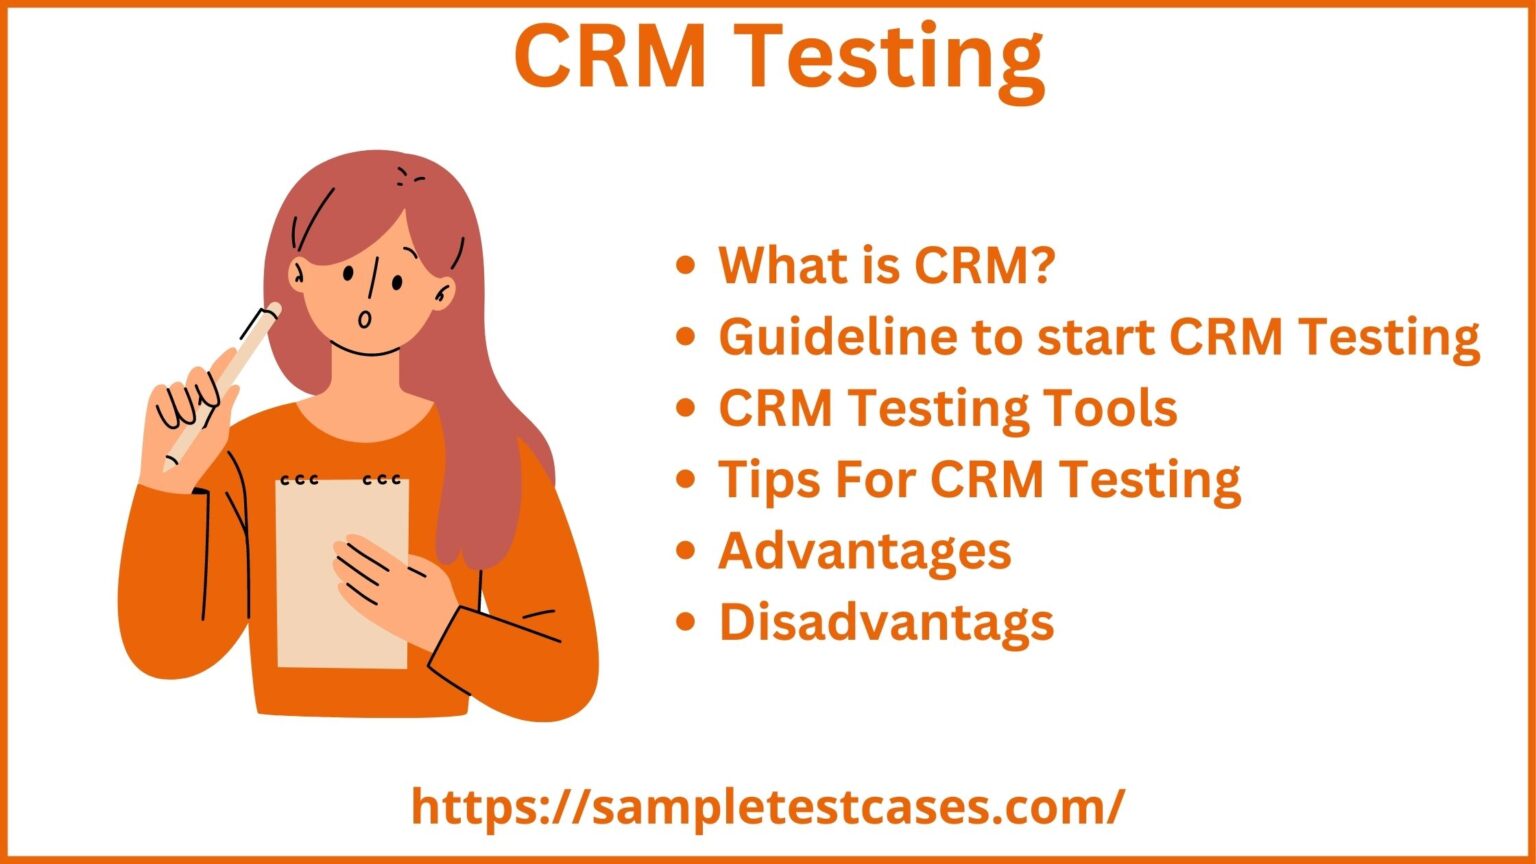 CRM Testing - Full Form, Tools and Guideline